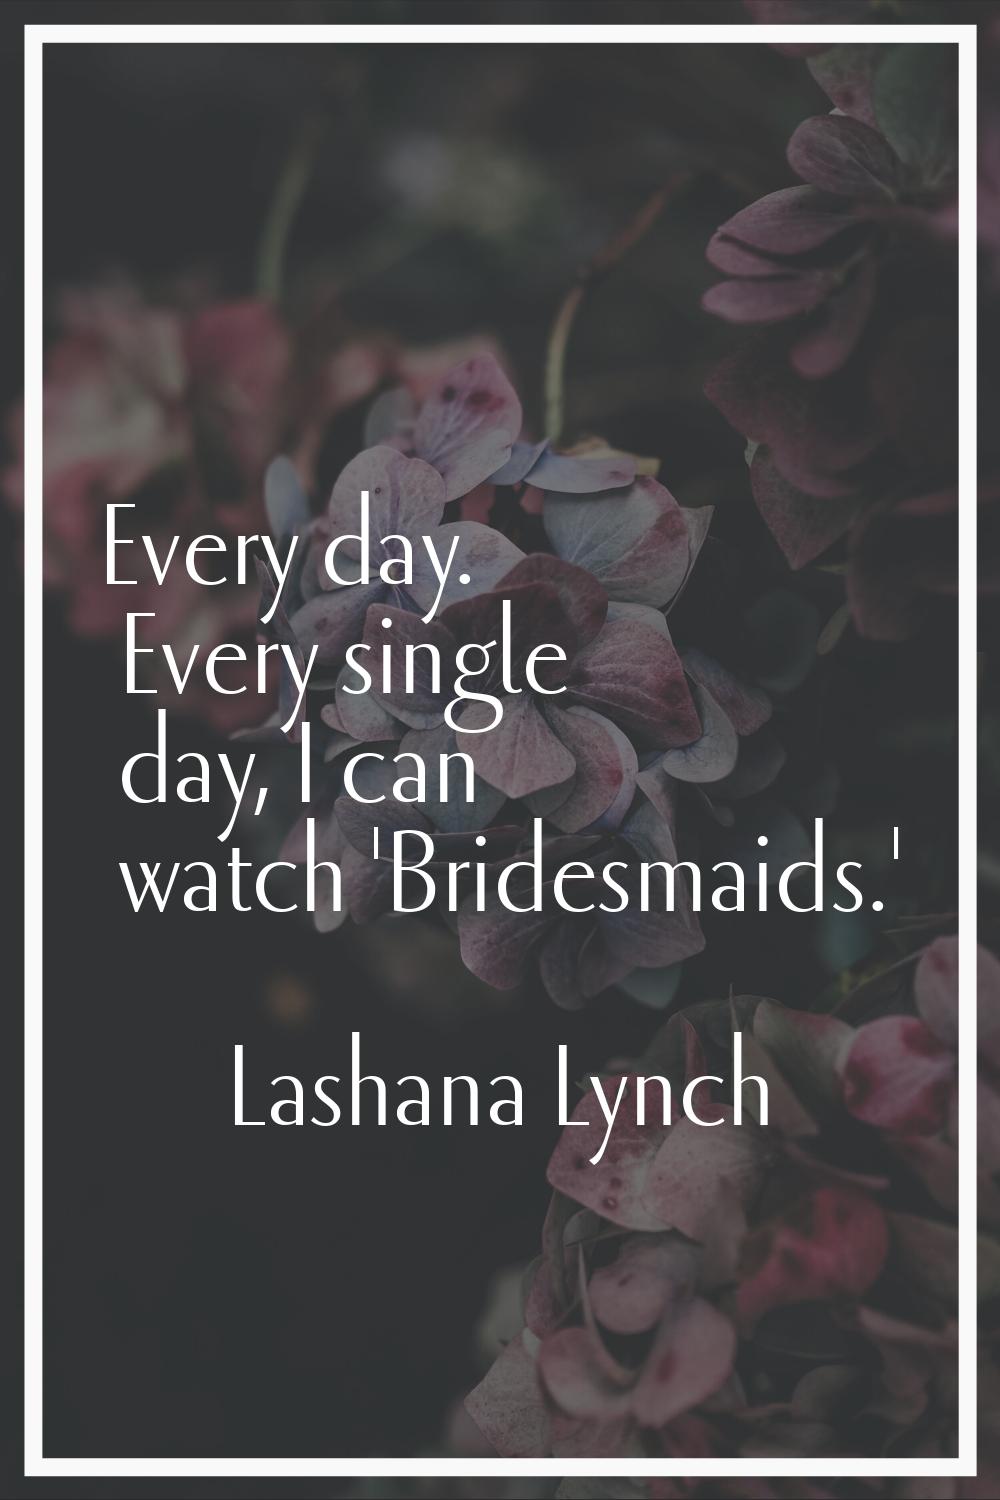 Every day. Every single day, I can watch 'Bridesmaids.'